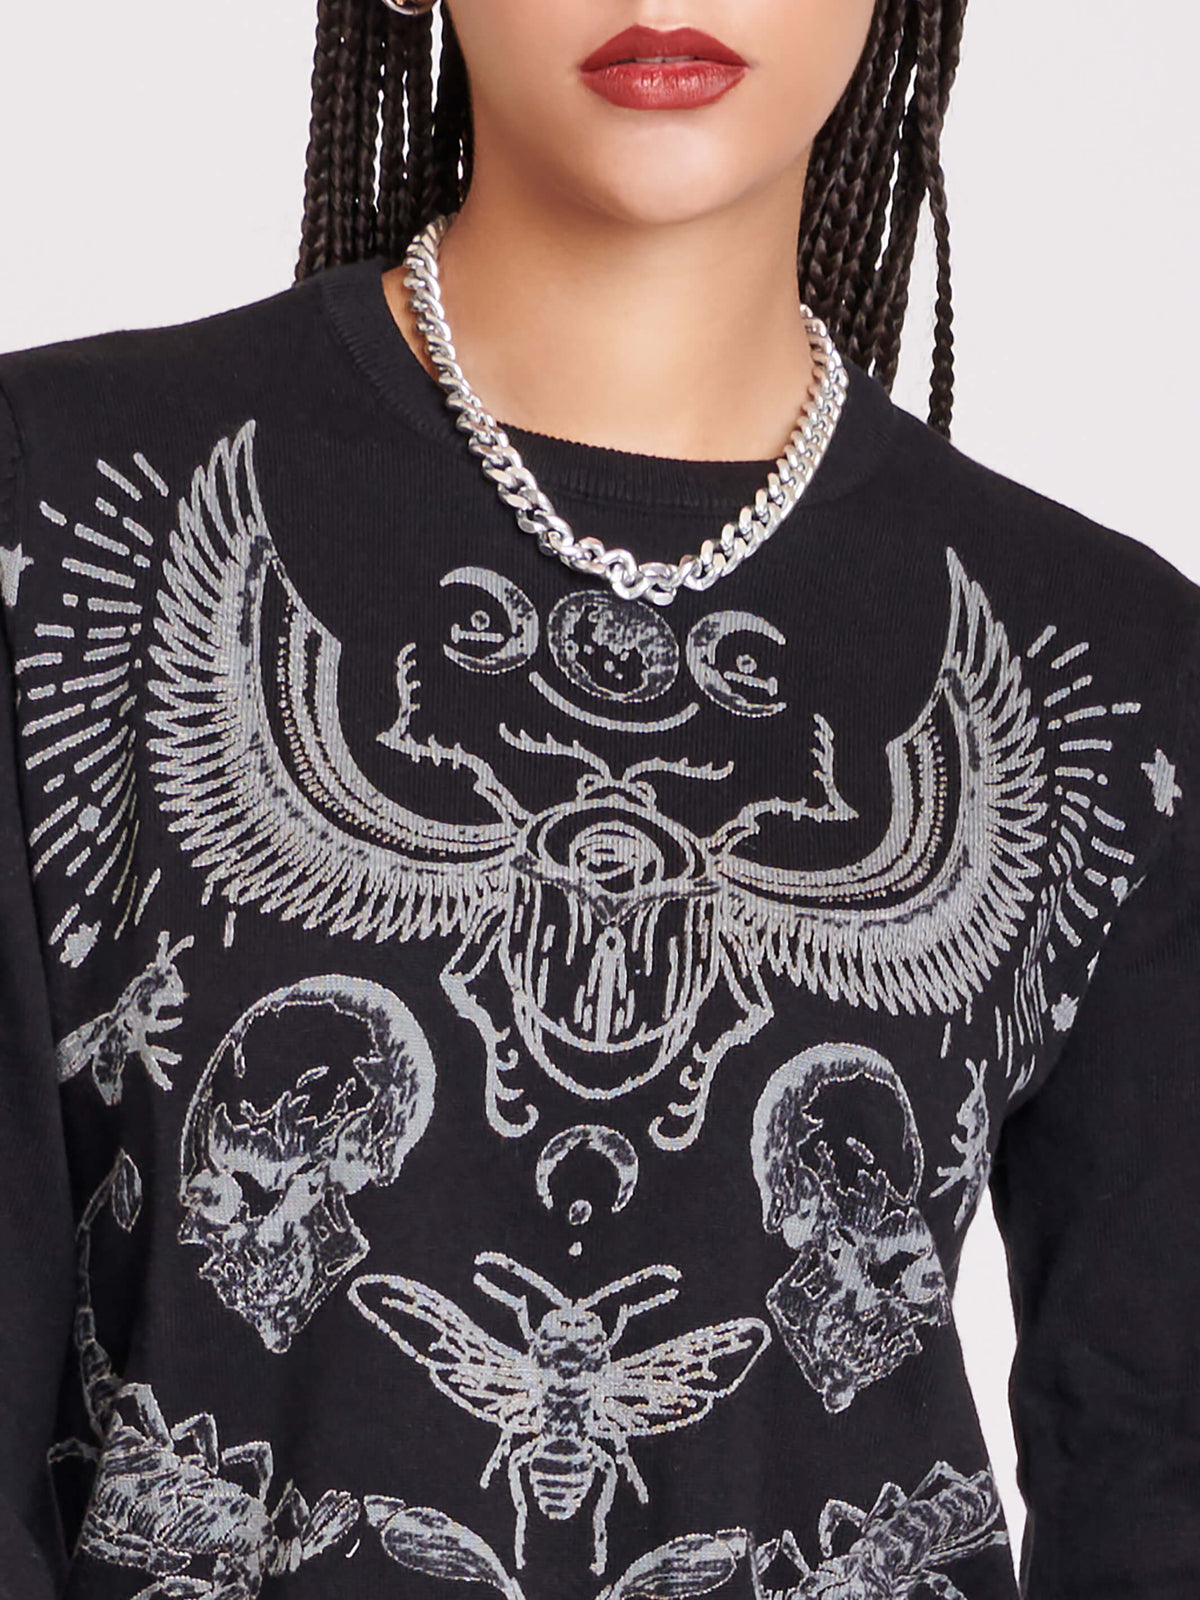 ancient relic sweater